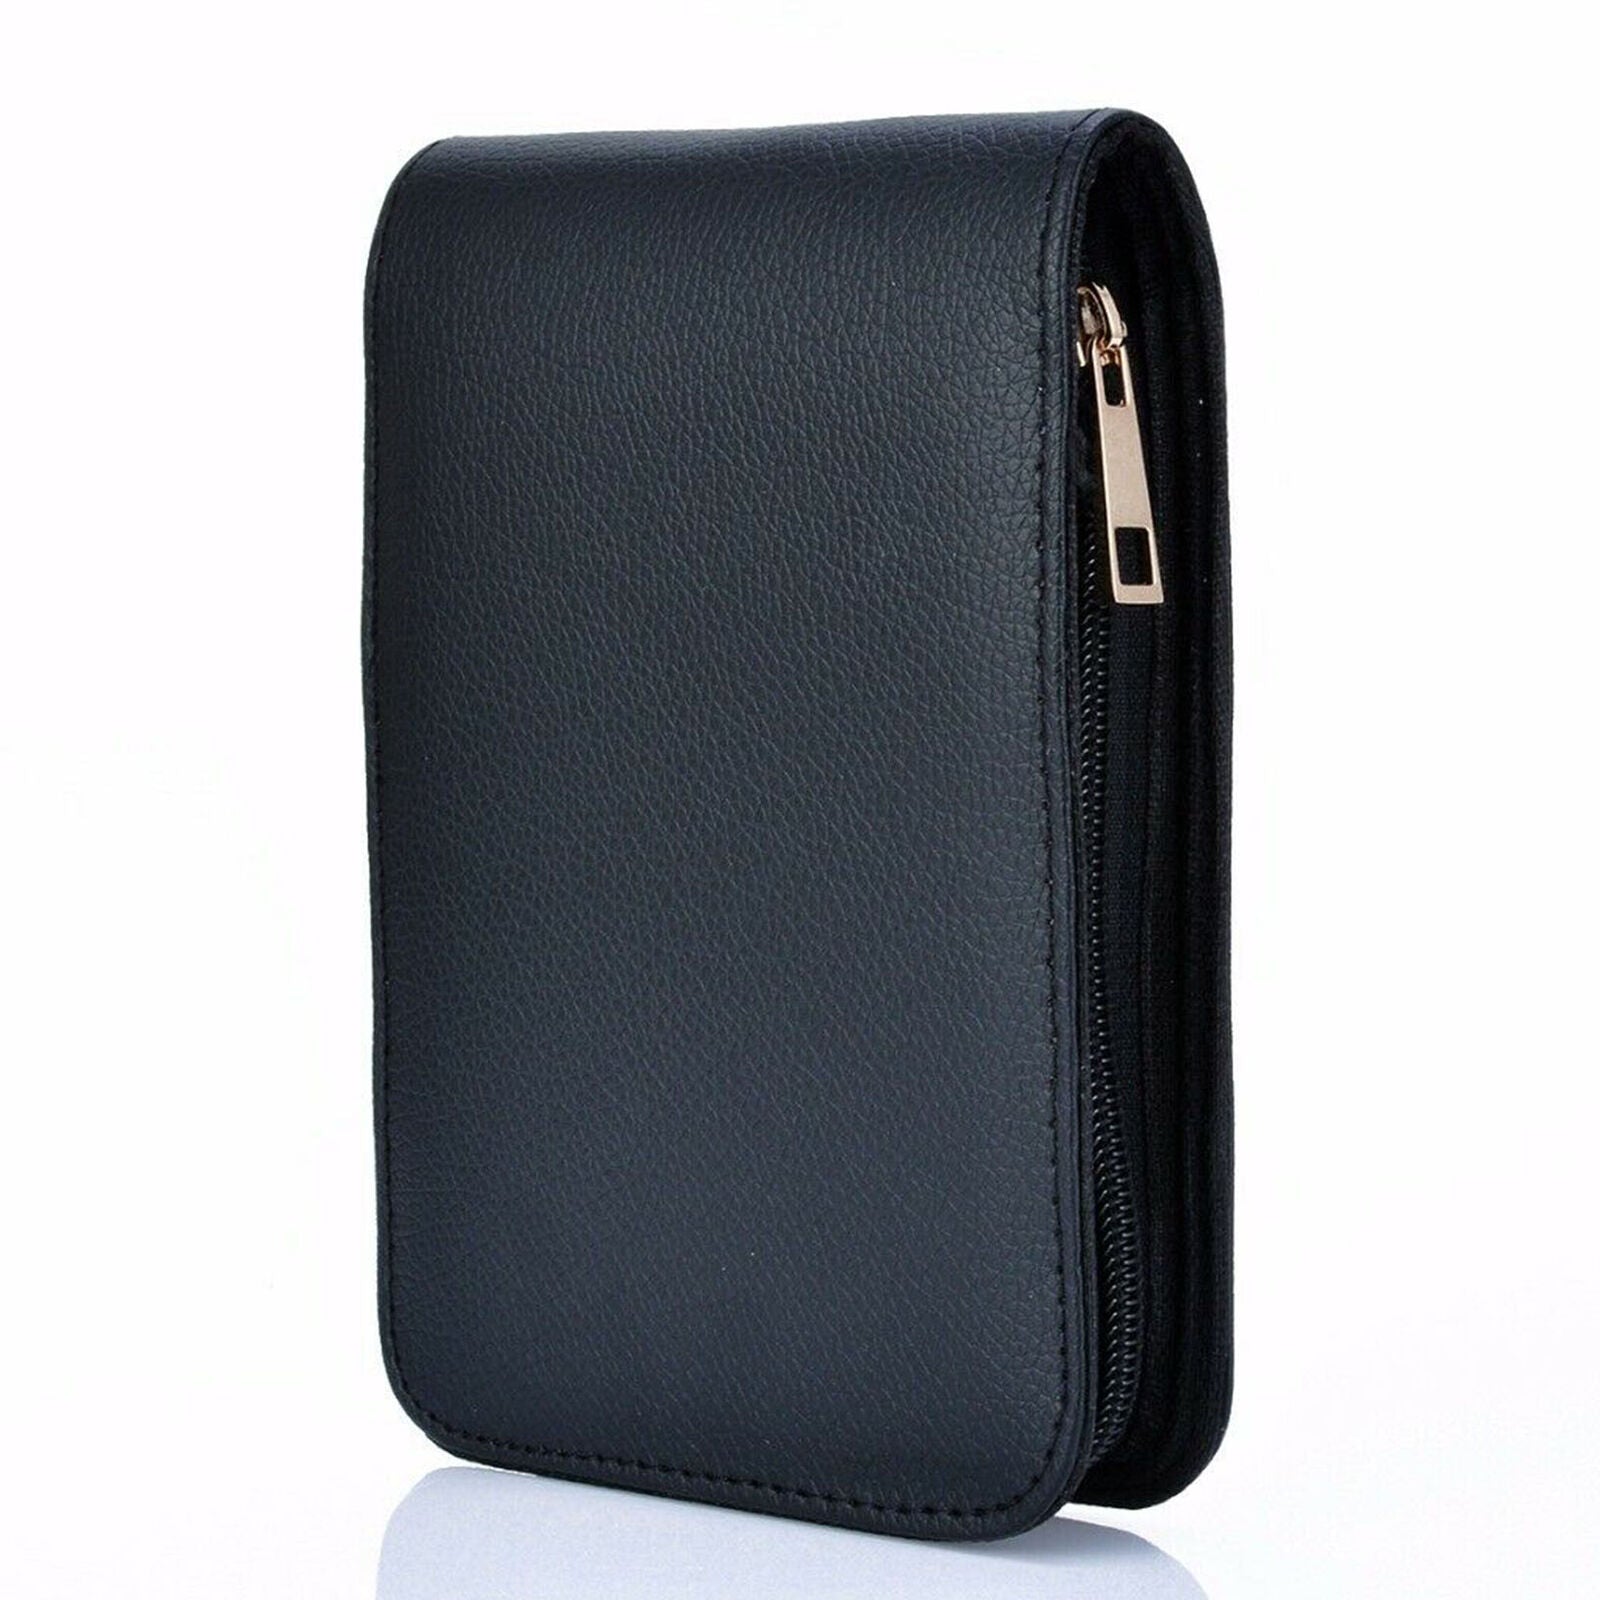 Fountain Pen Roller Leather Binder Case Holder Stationery For 12 Pens Craft Gift